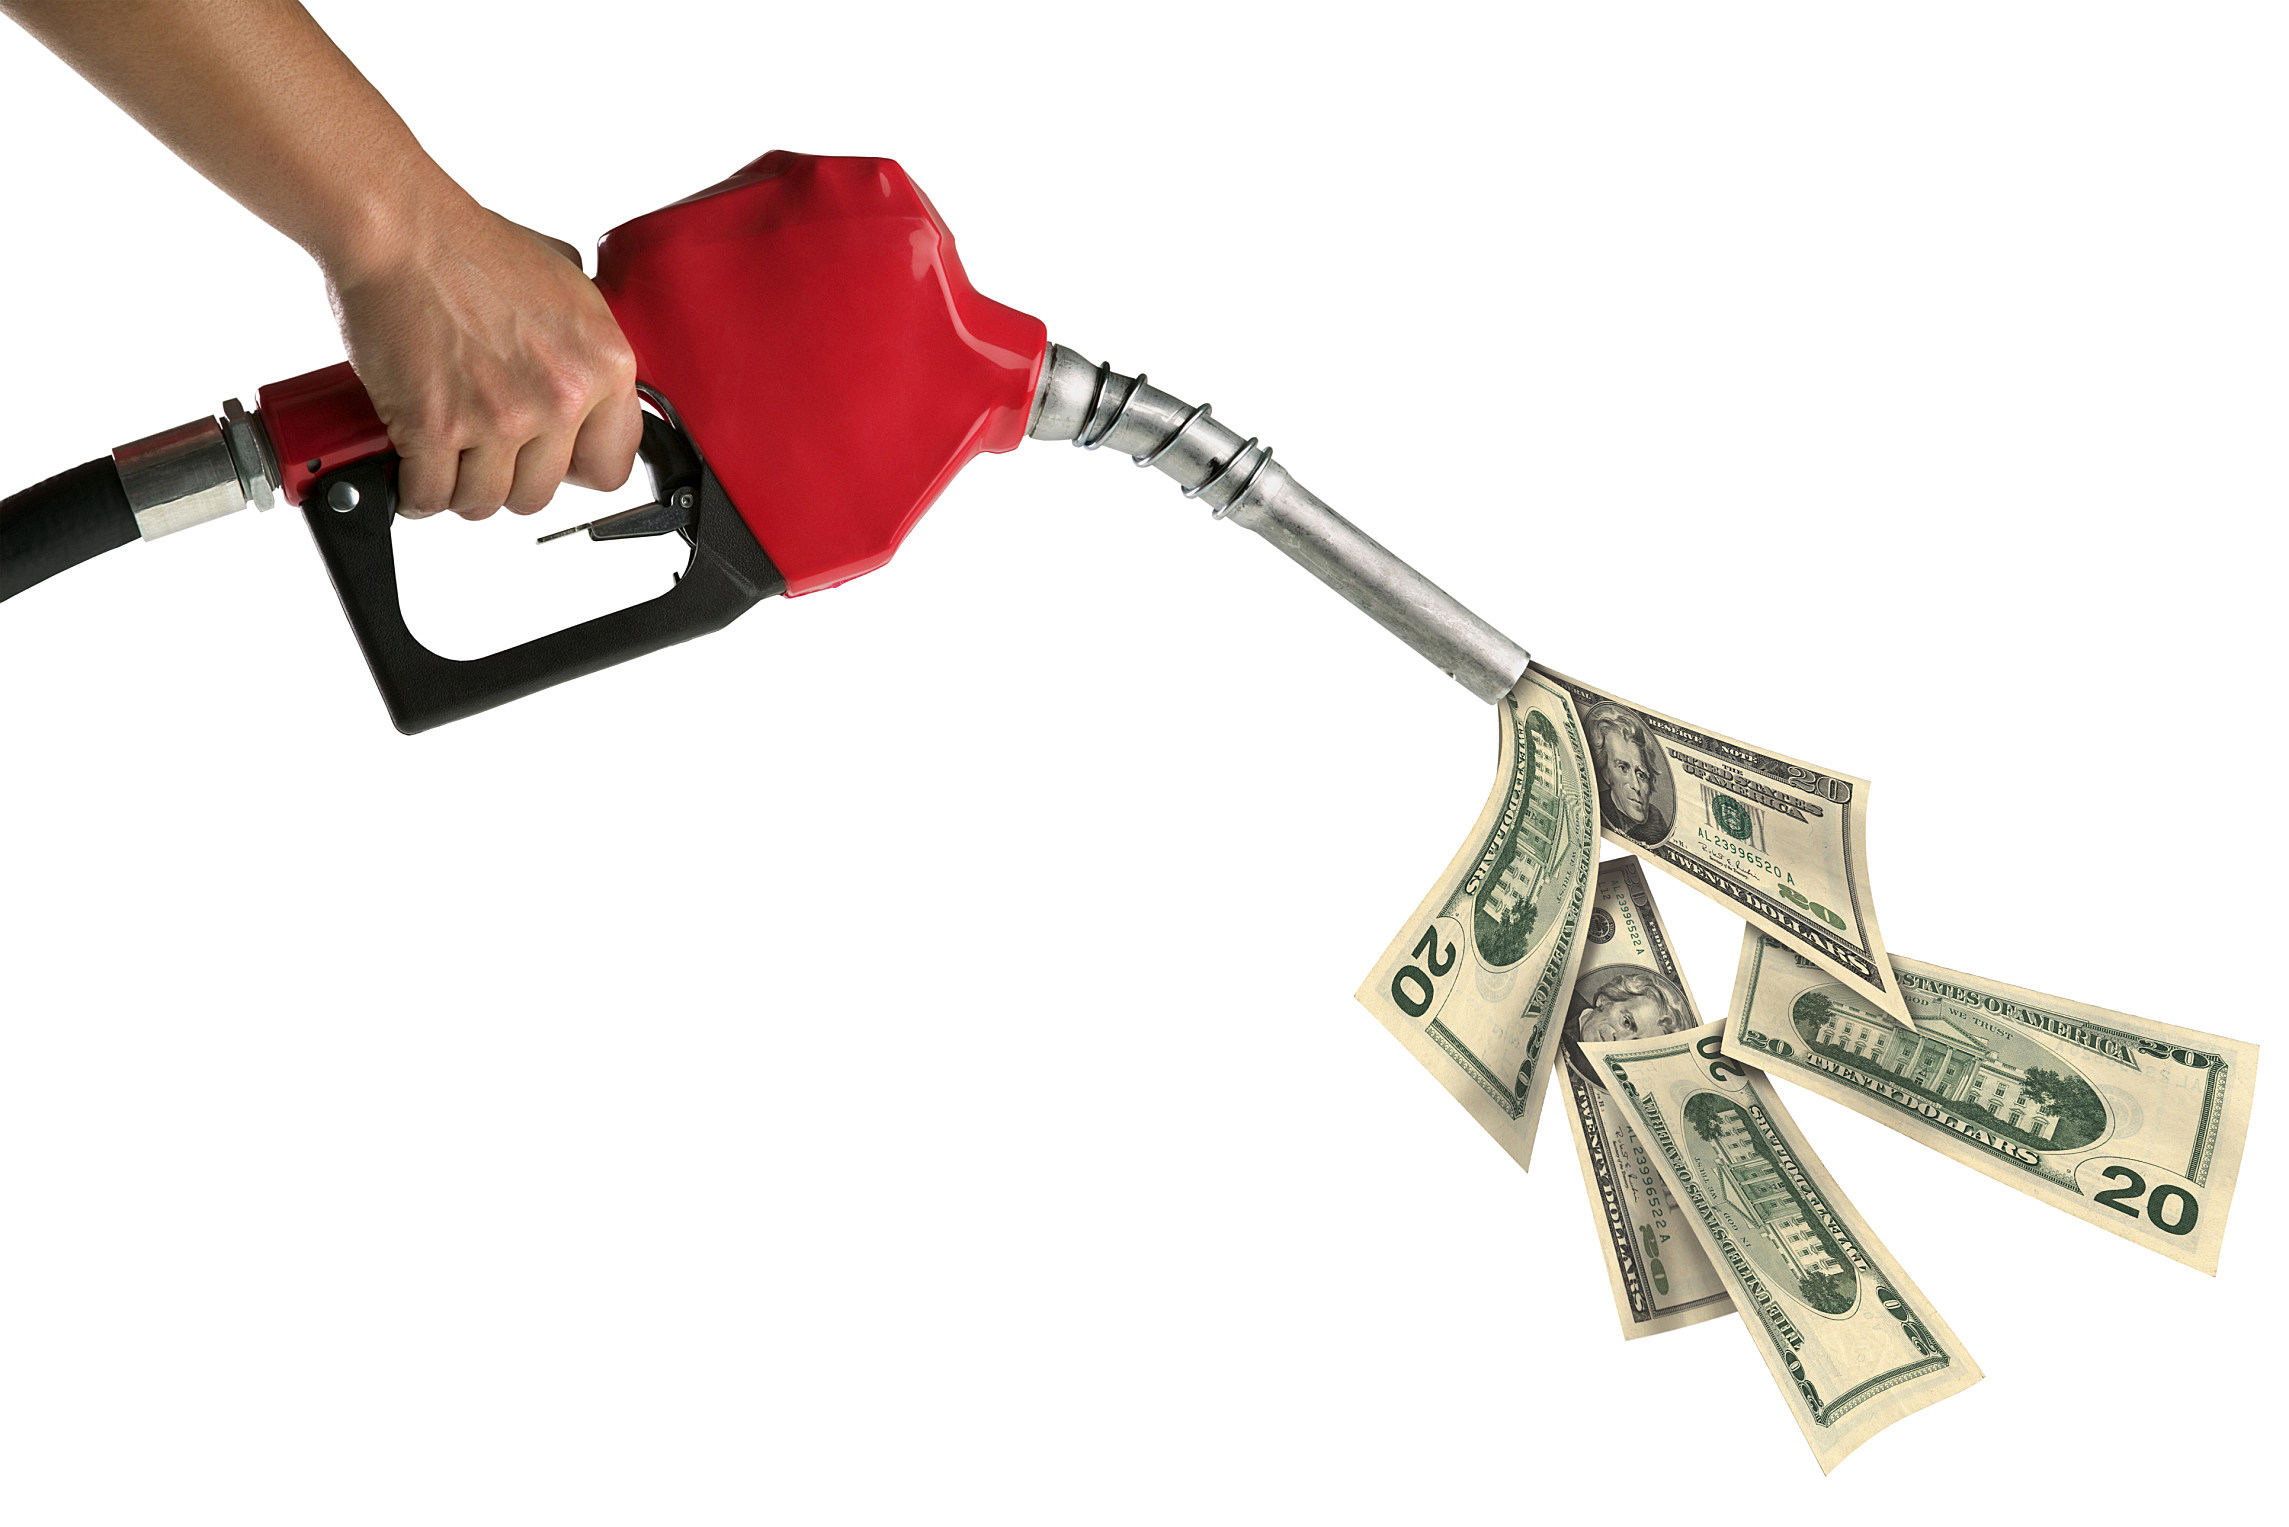 Gas Money One Dollar Per Gallon: How to save hundreds on gasoline